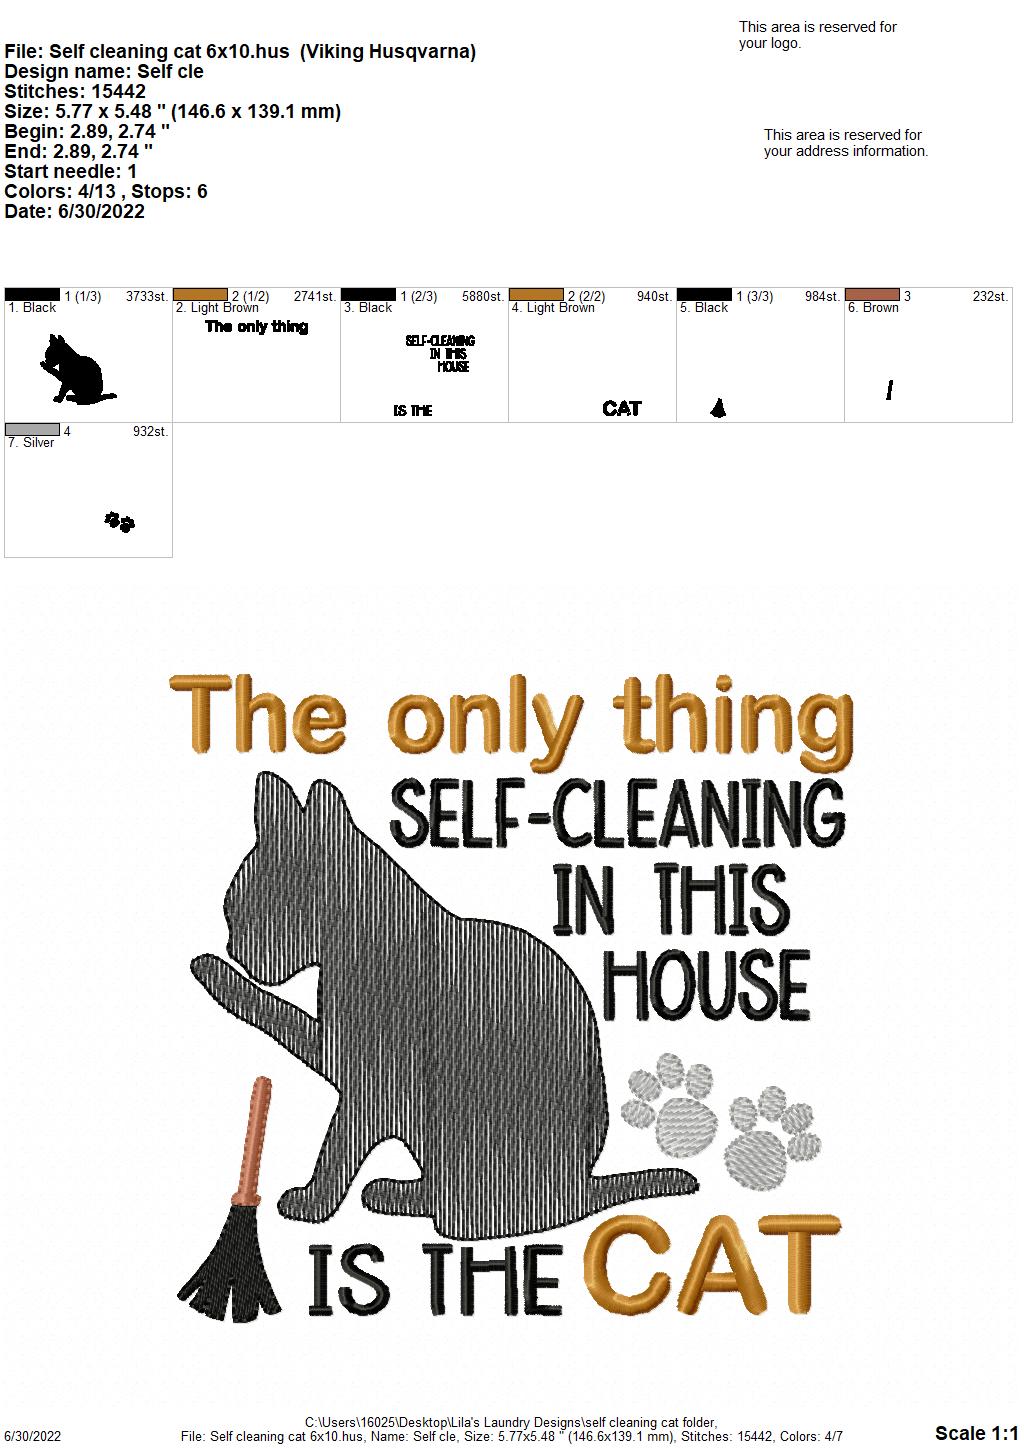 Self Cleaning Cat - 3 sizes- Digital Embroidery Design